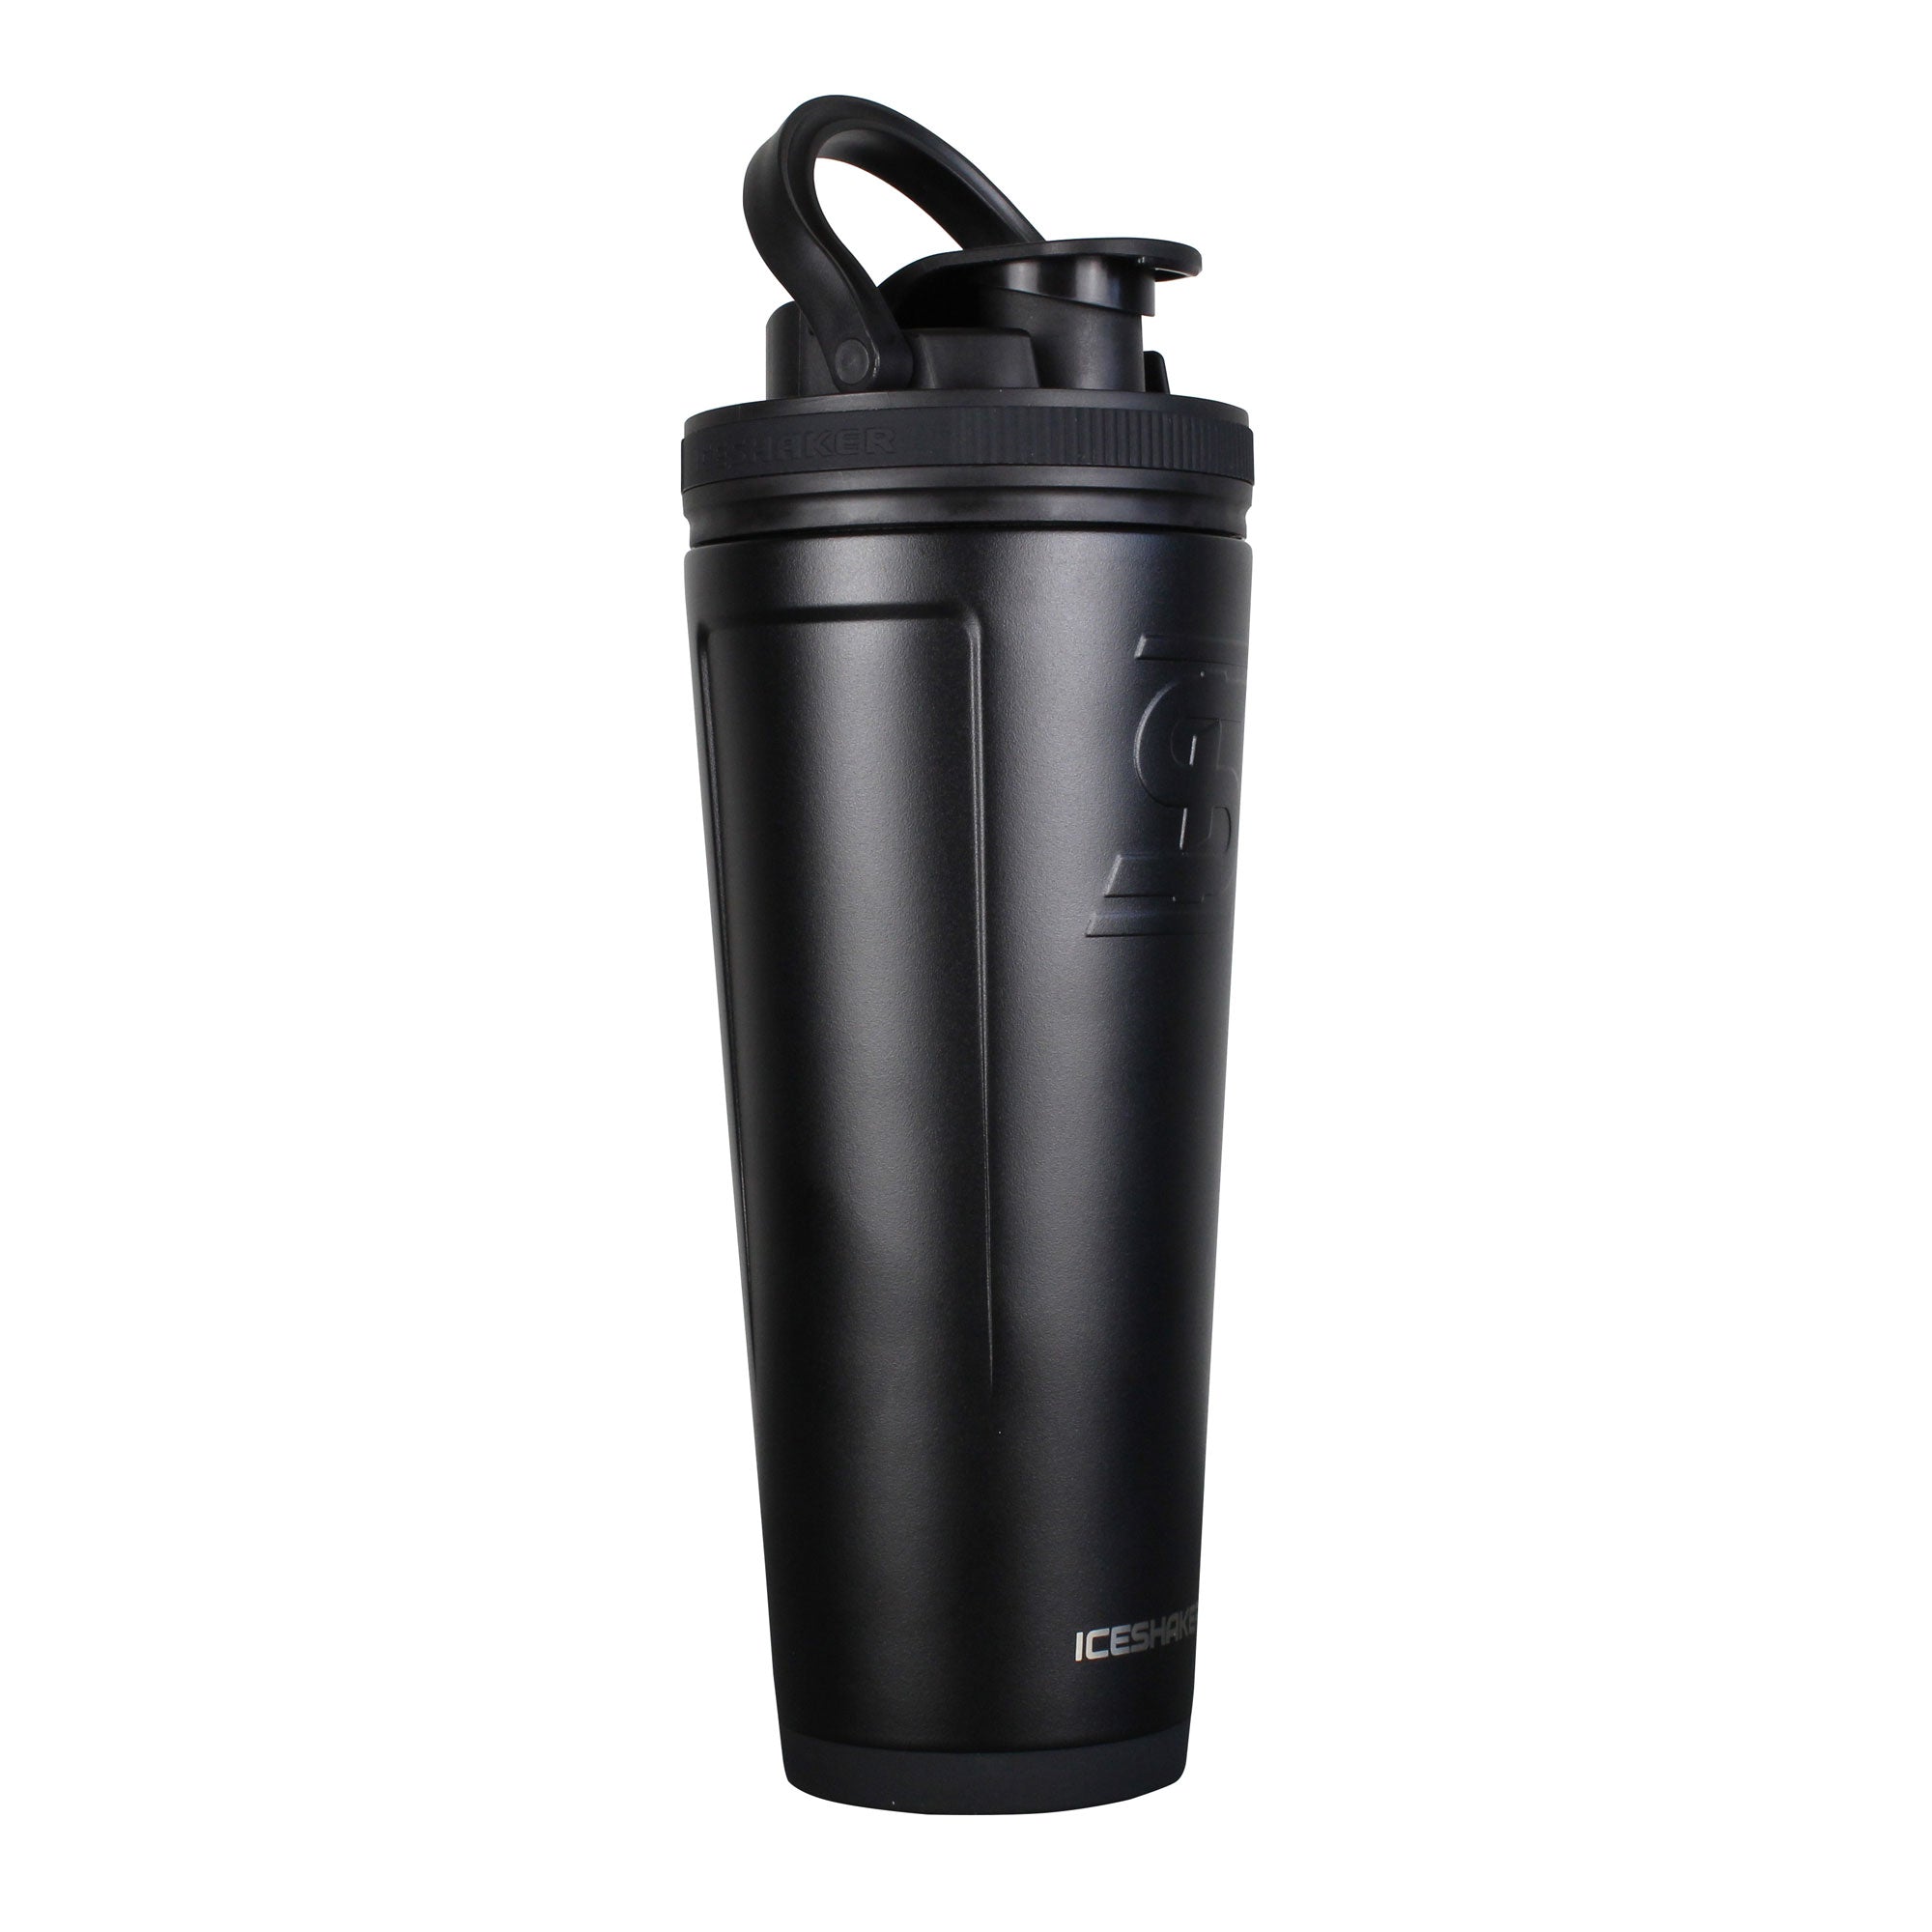 Do You Really Need A Protein Shaker Bottle?